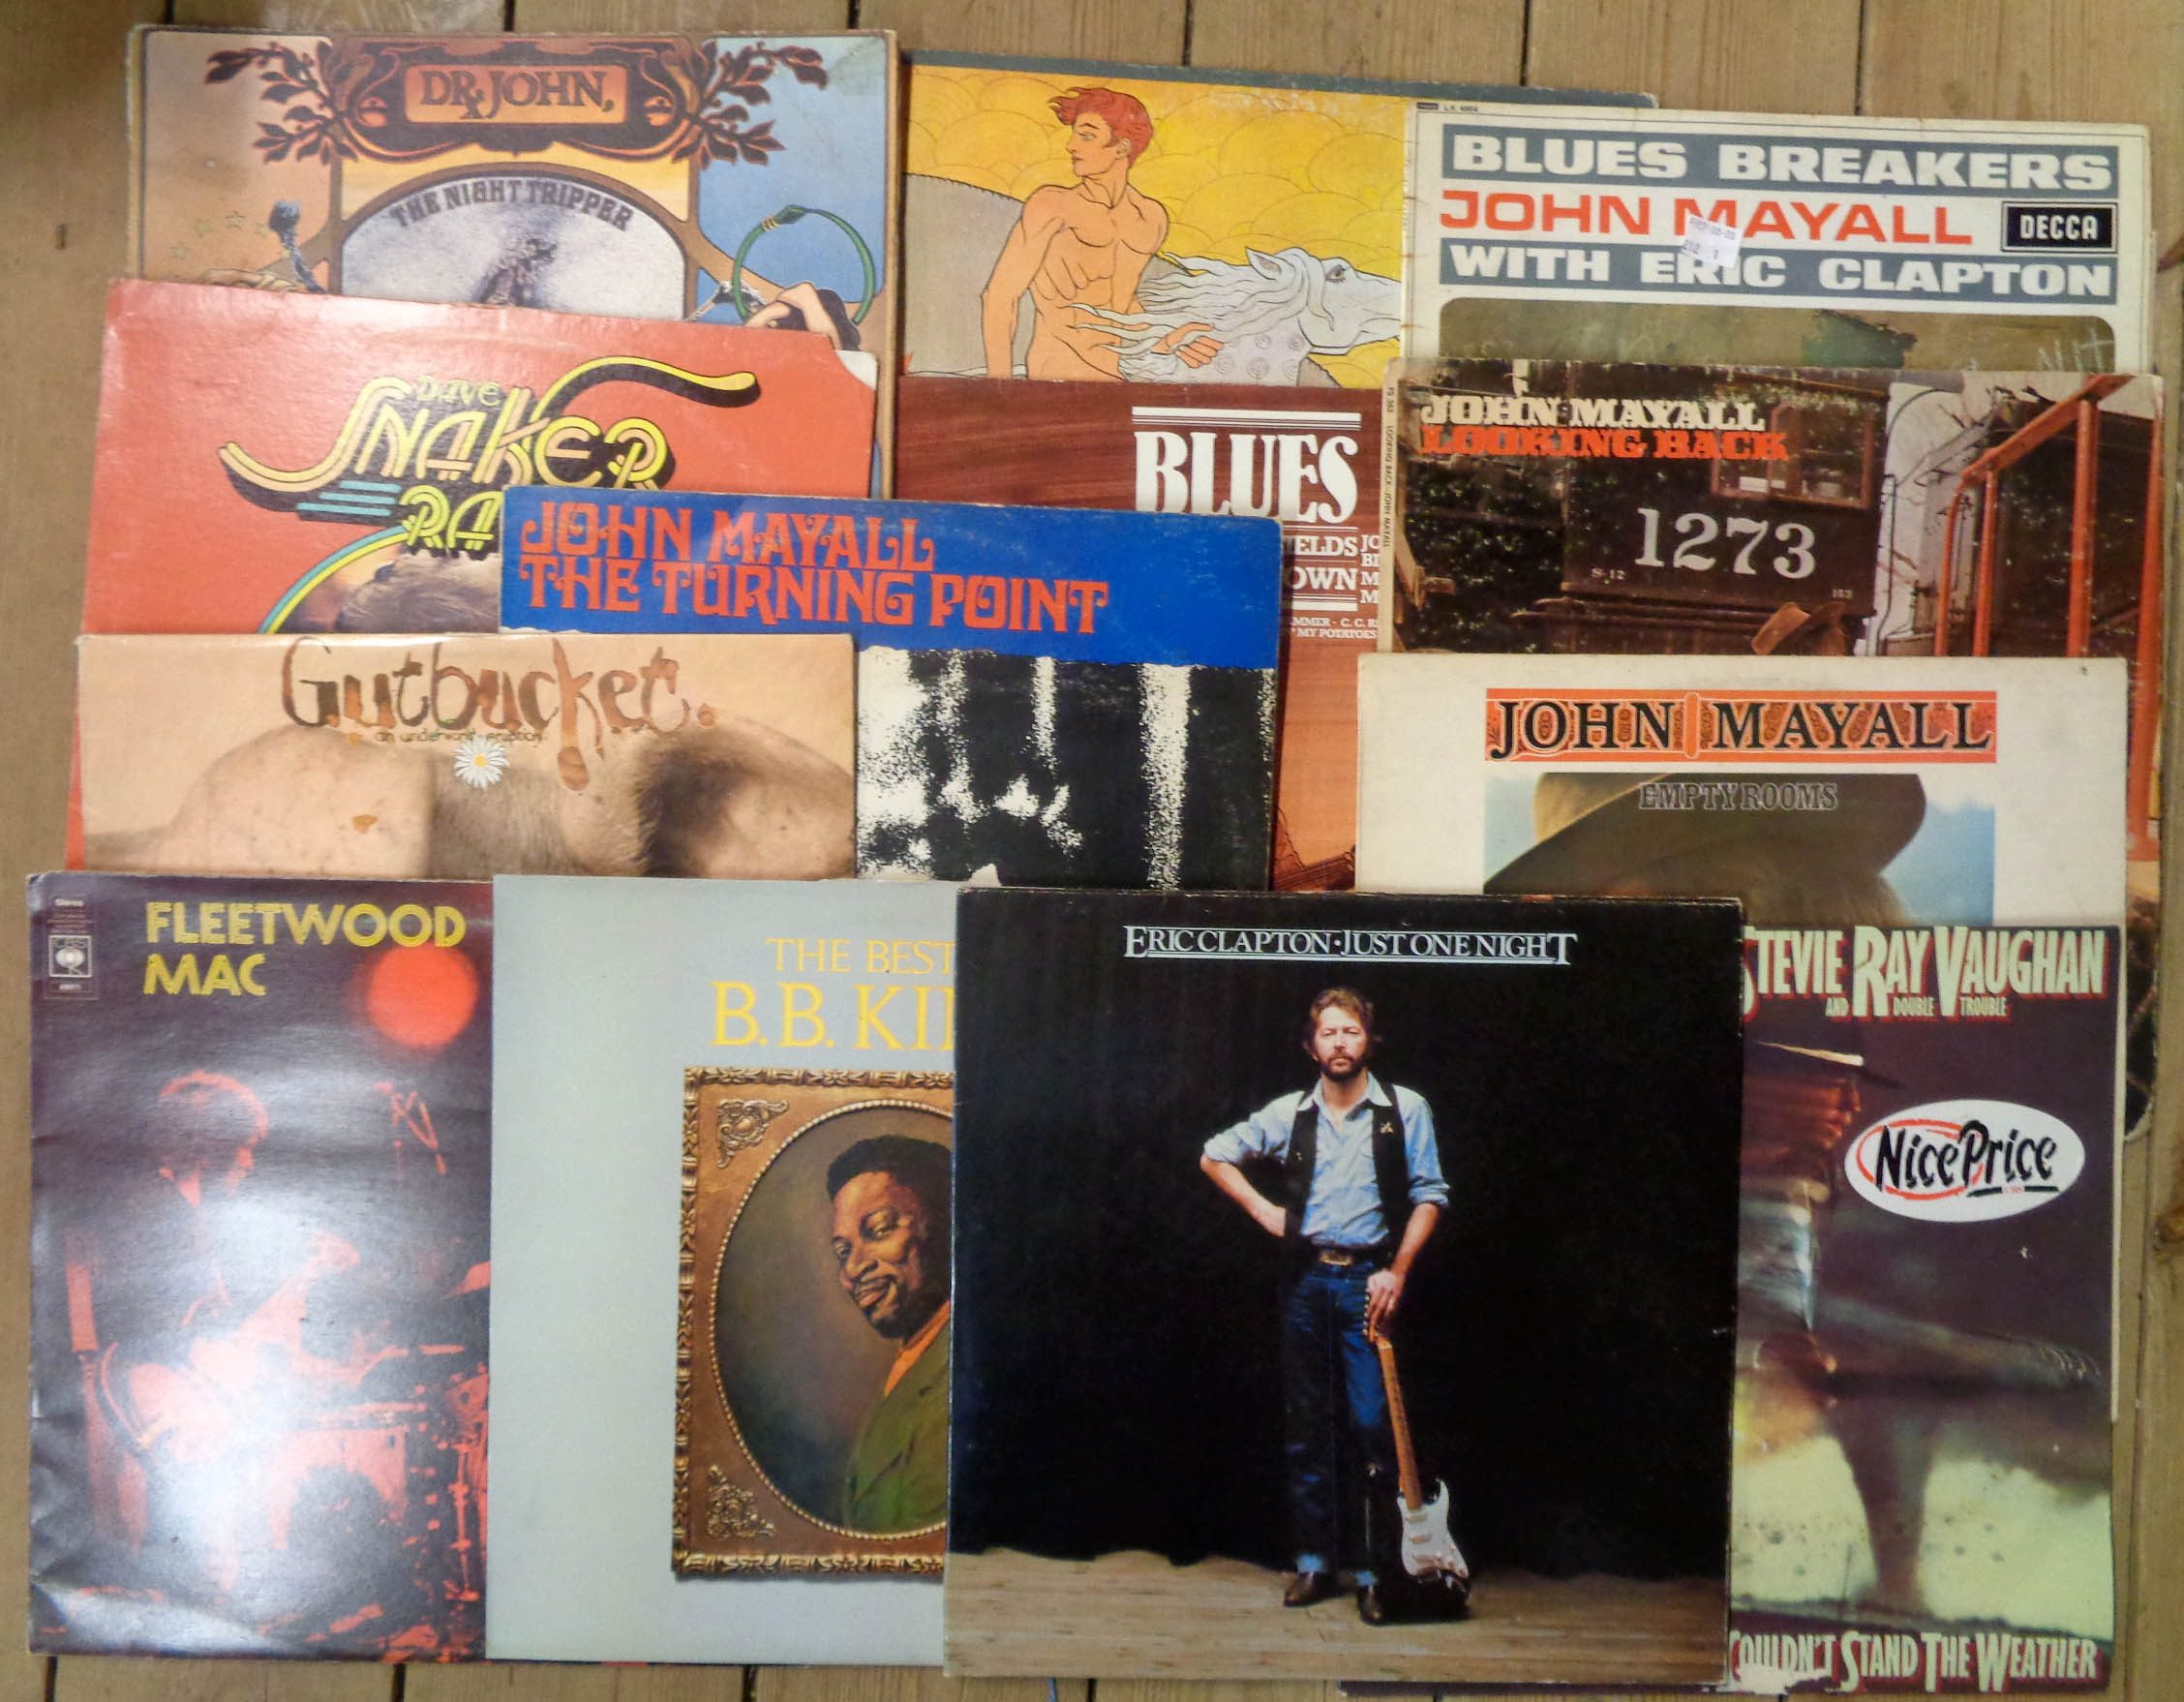 A quantity of blues vinyl LPs including Fleetwood Mac, John Mayall Blues Breakers with Eric Clapton, - Image 3 of 3